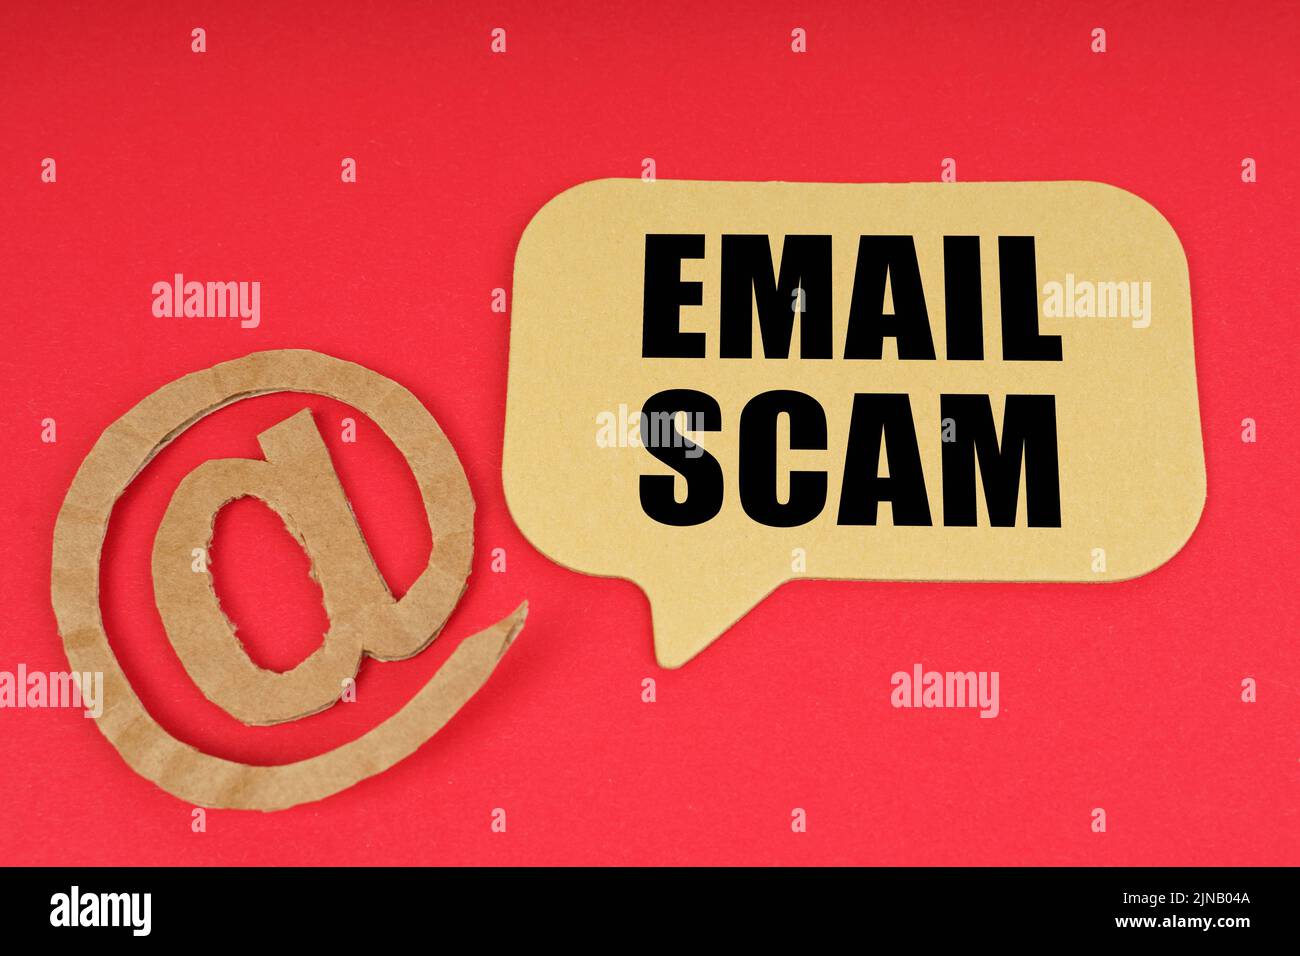 Email and business. On a red surface, a symbol and a sign with the inscription - EMAIL SCAM Stock Photo